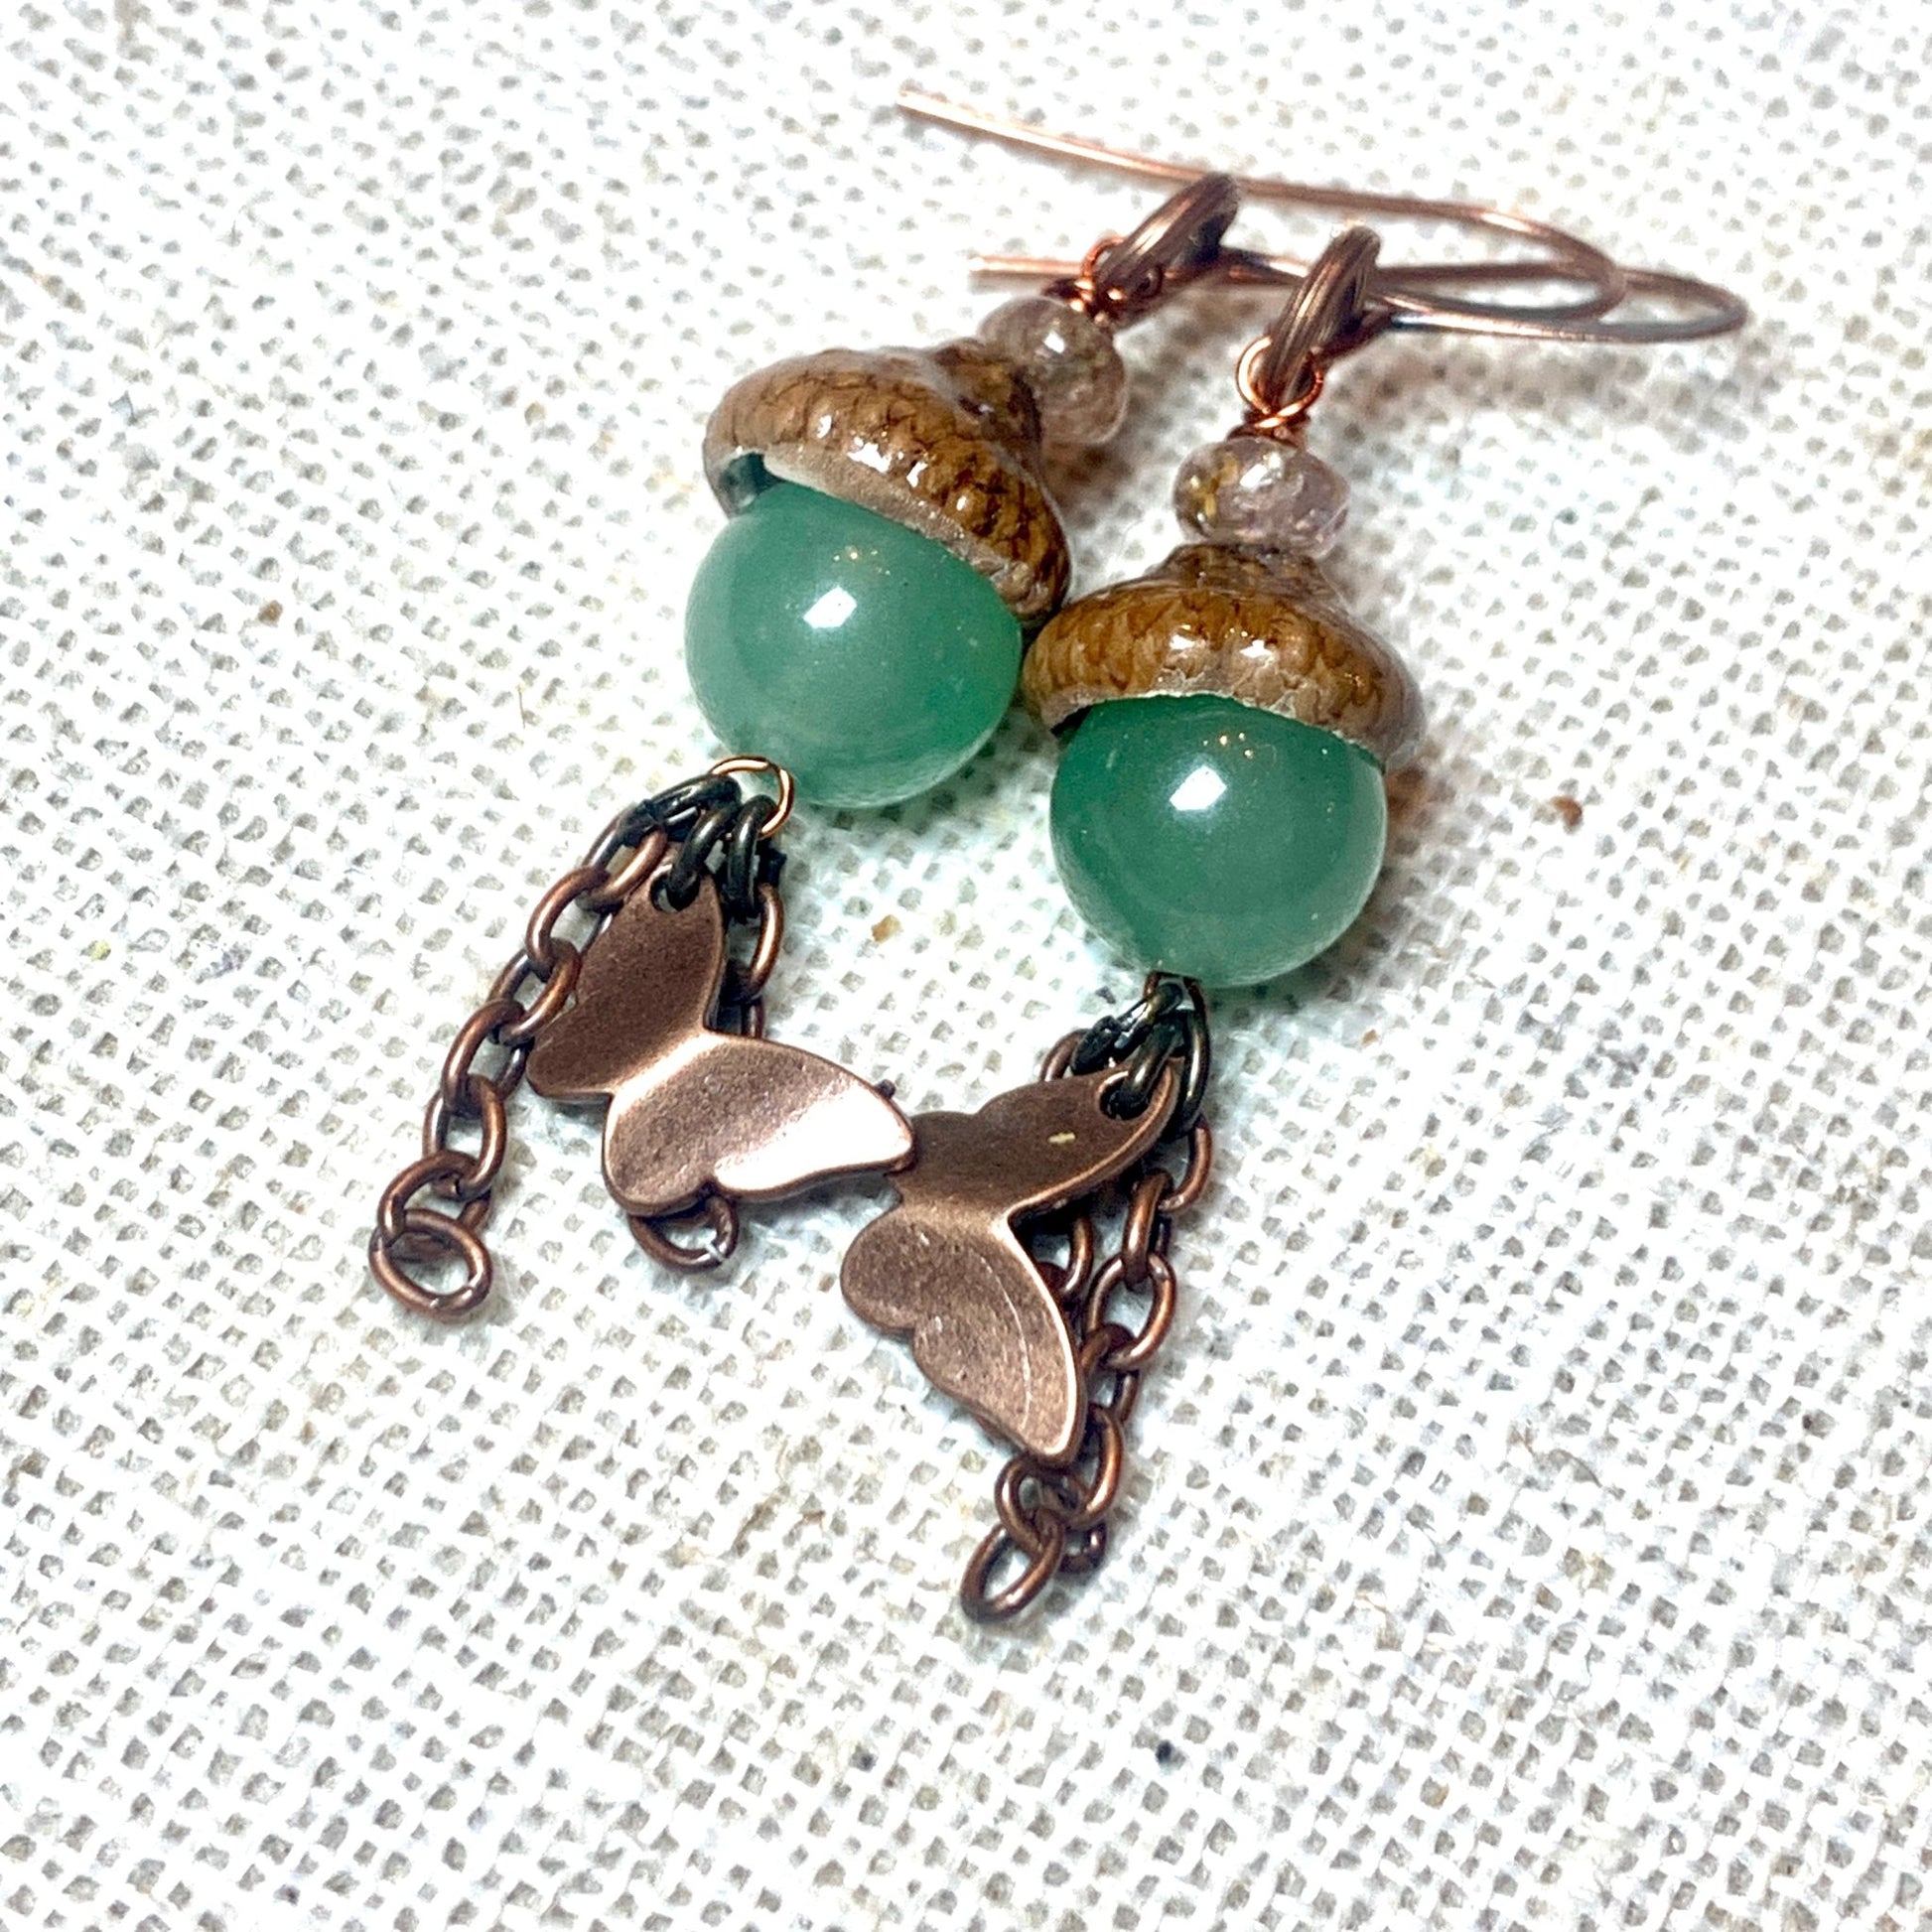 Copper Butterfly Earrings with Green Aventurine Acorn Gems - Coral and Vine Co